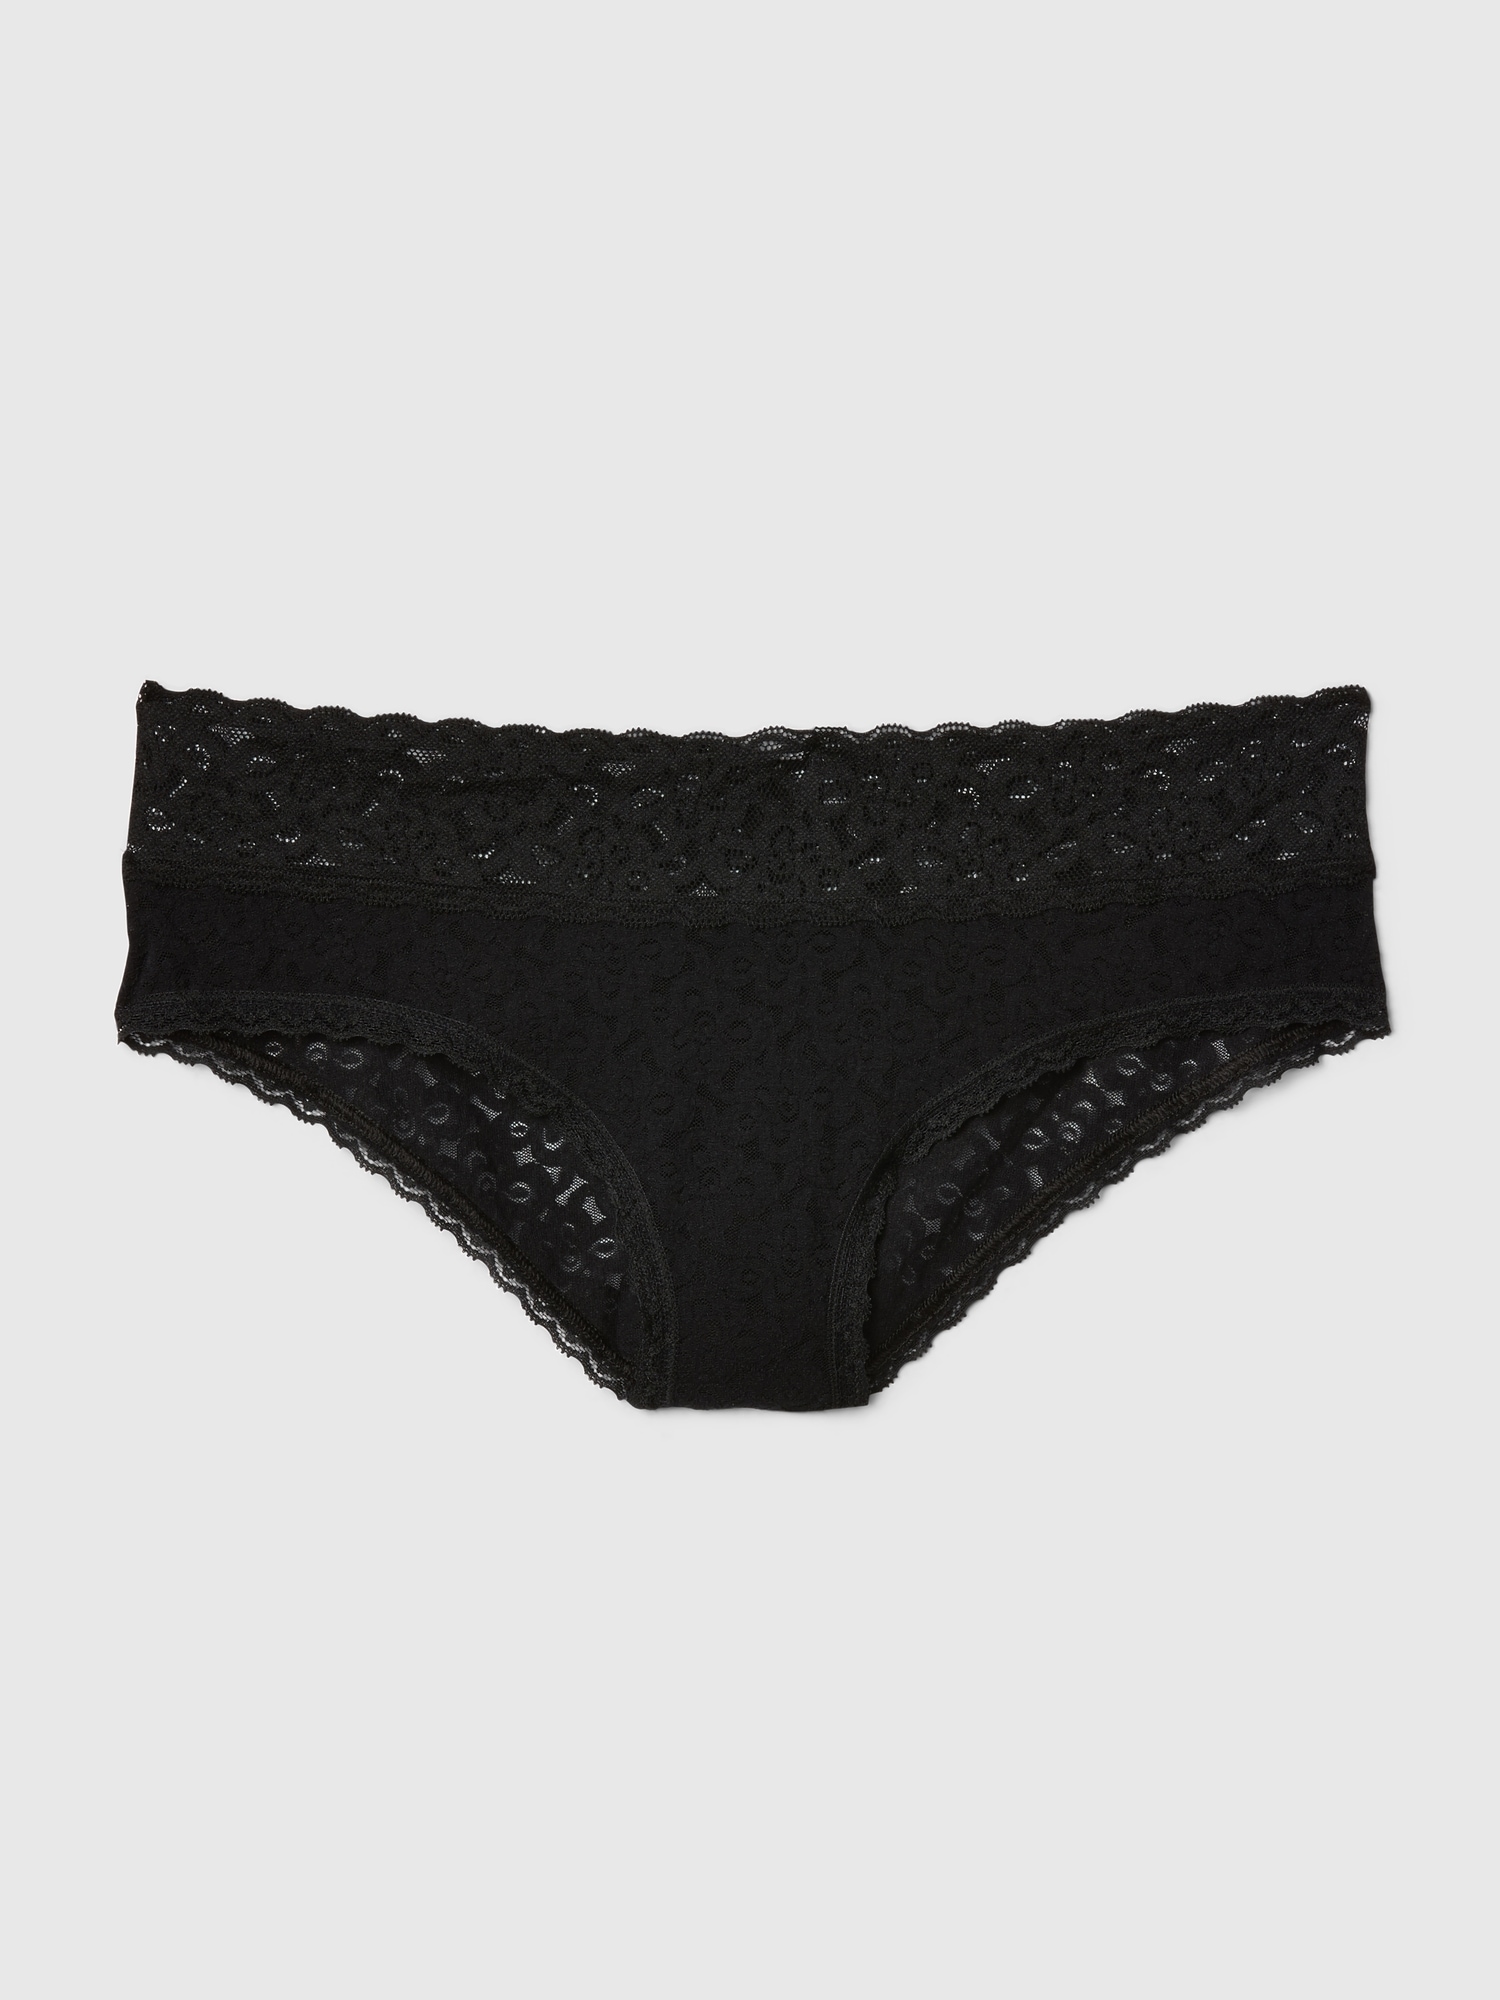 Women's Clearance Lace Waist Brief 6-pack made with Organic Cotton